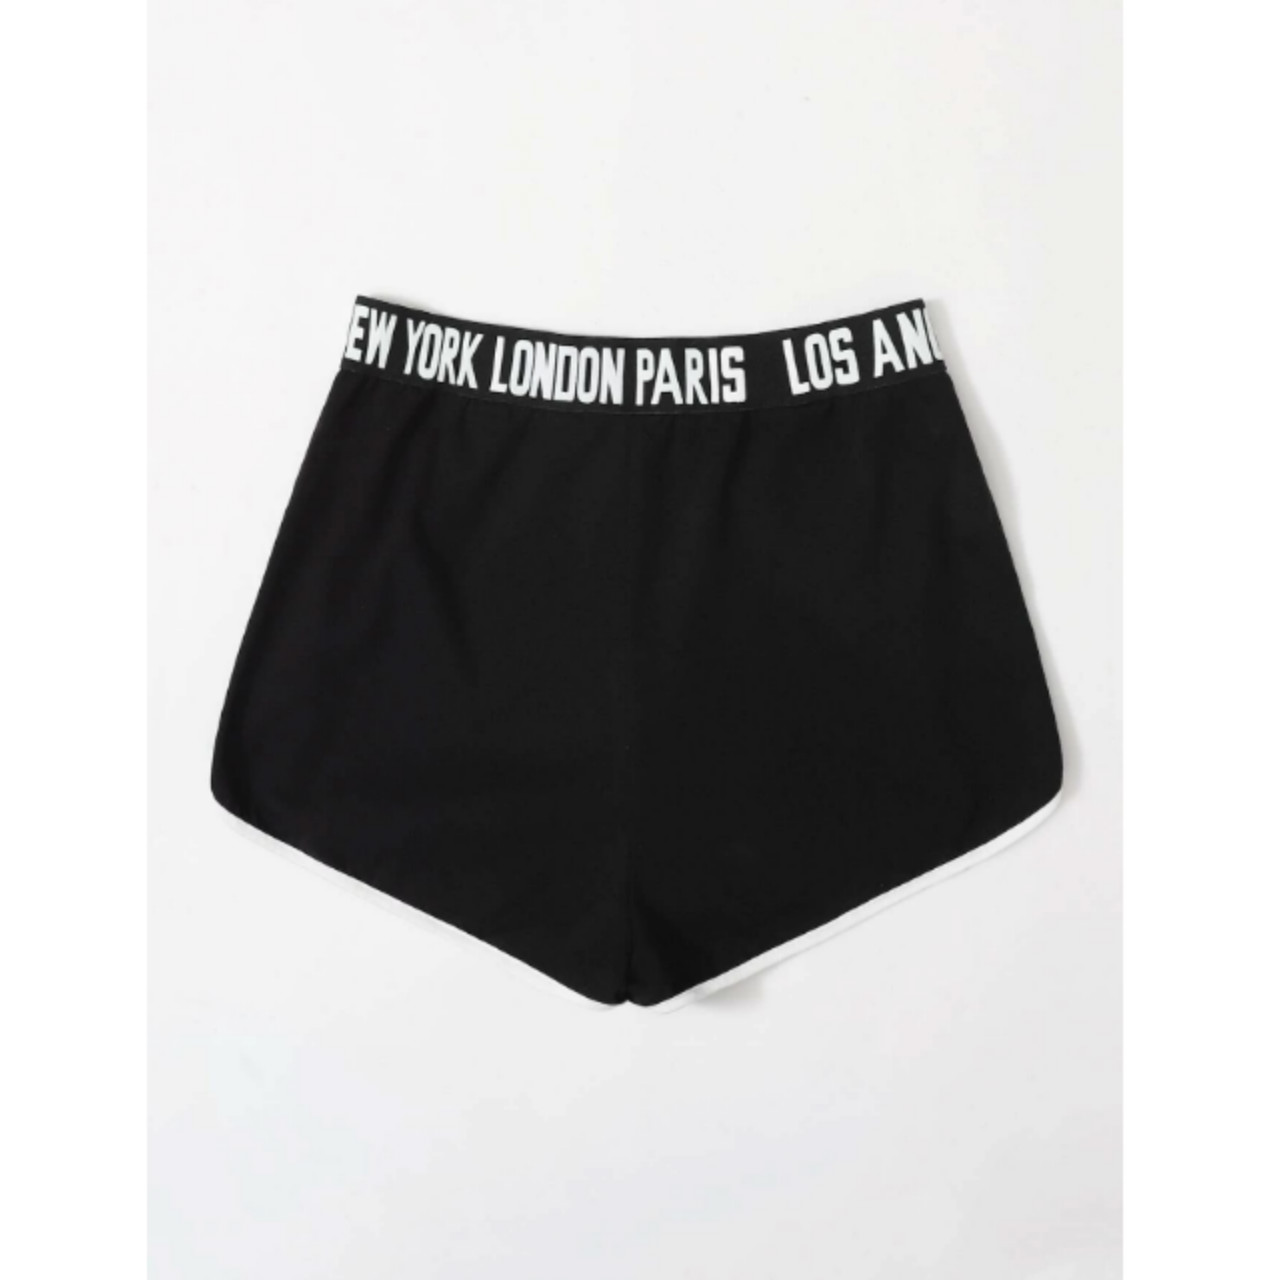 Letter tape waist dolphin shorts s